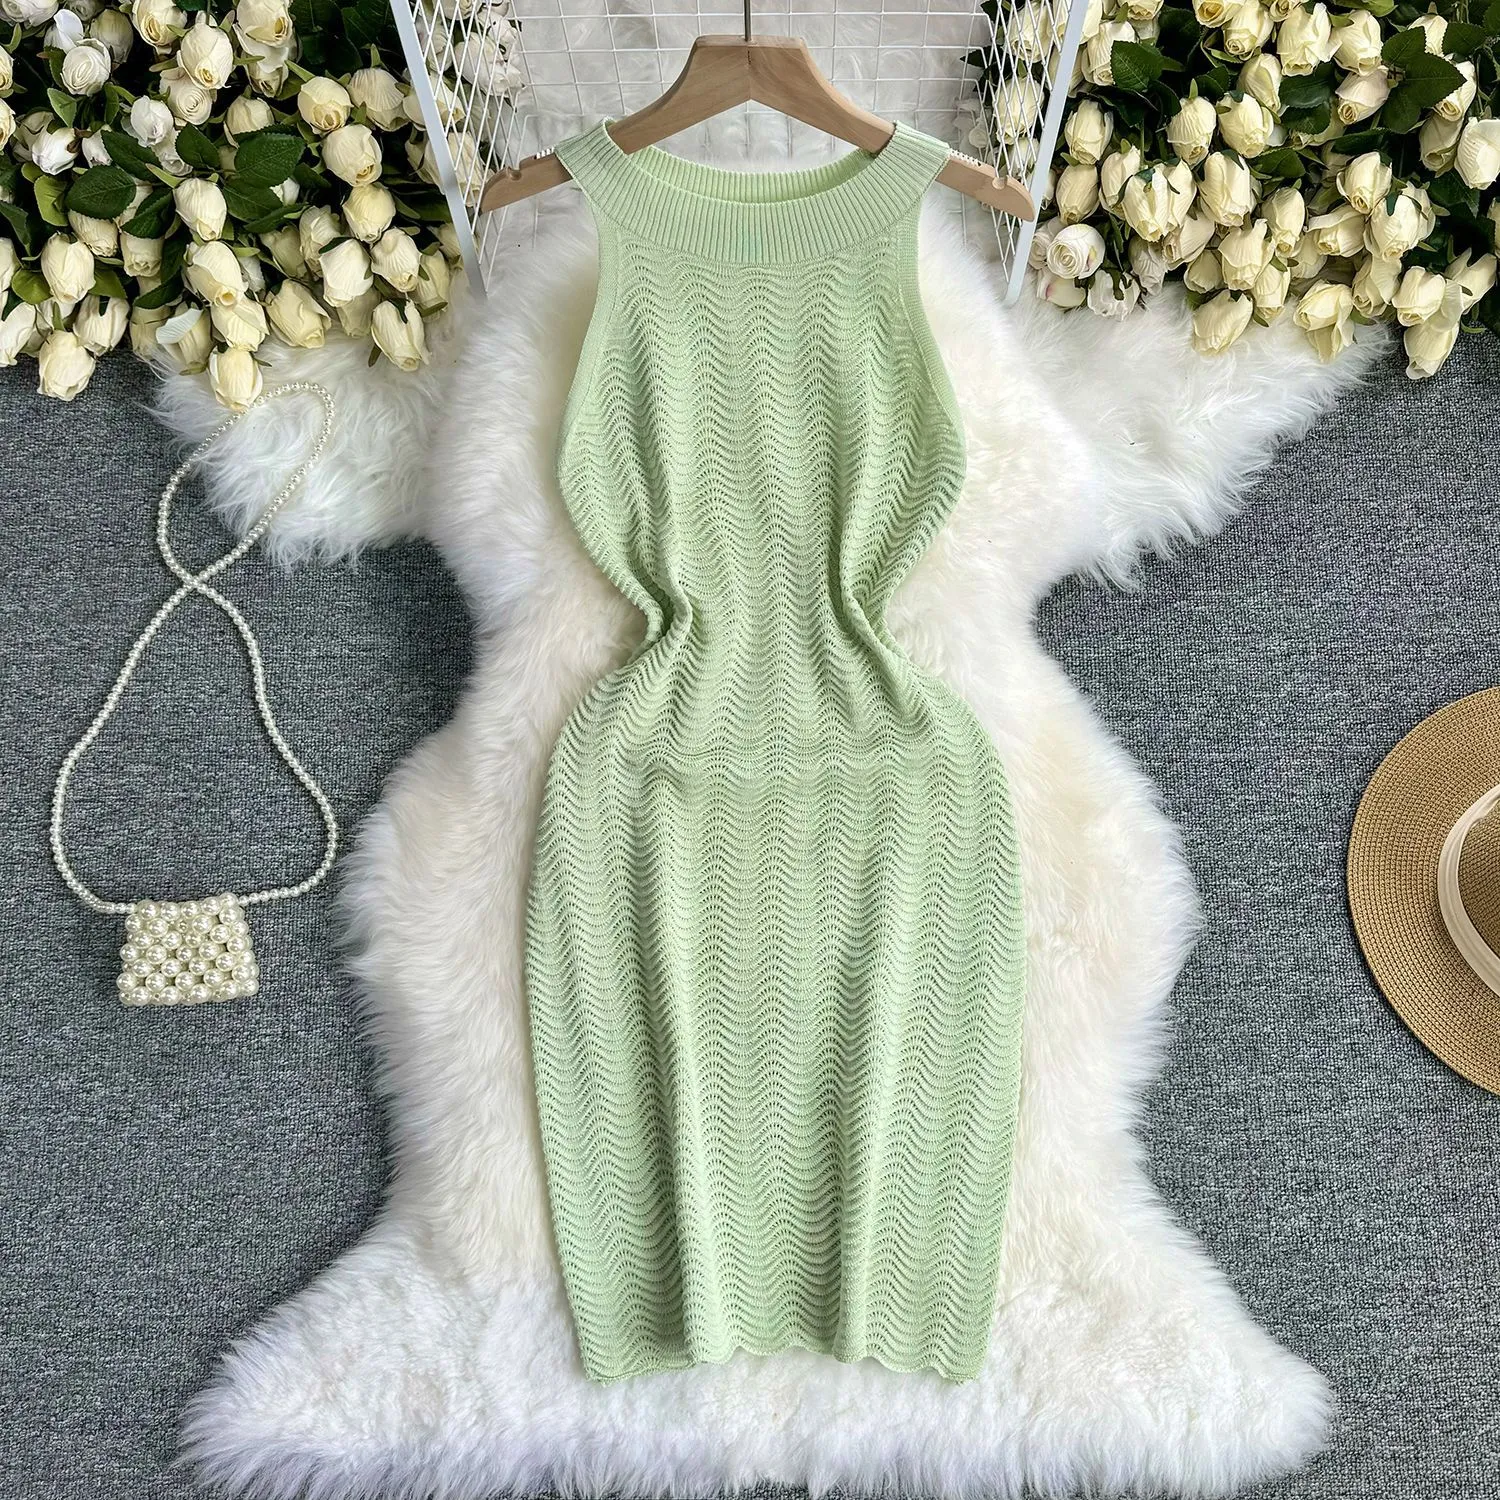 Pure Desire Wind Hanging Neck Sleeveless Knitted Dress Women's Summer Style Waist Closing Slim Fit Wrapped Hip Short Tank Top Skirt